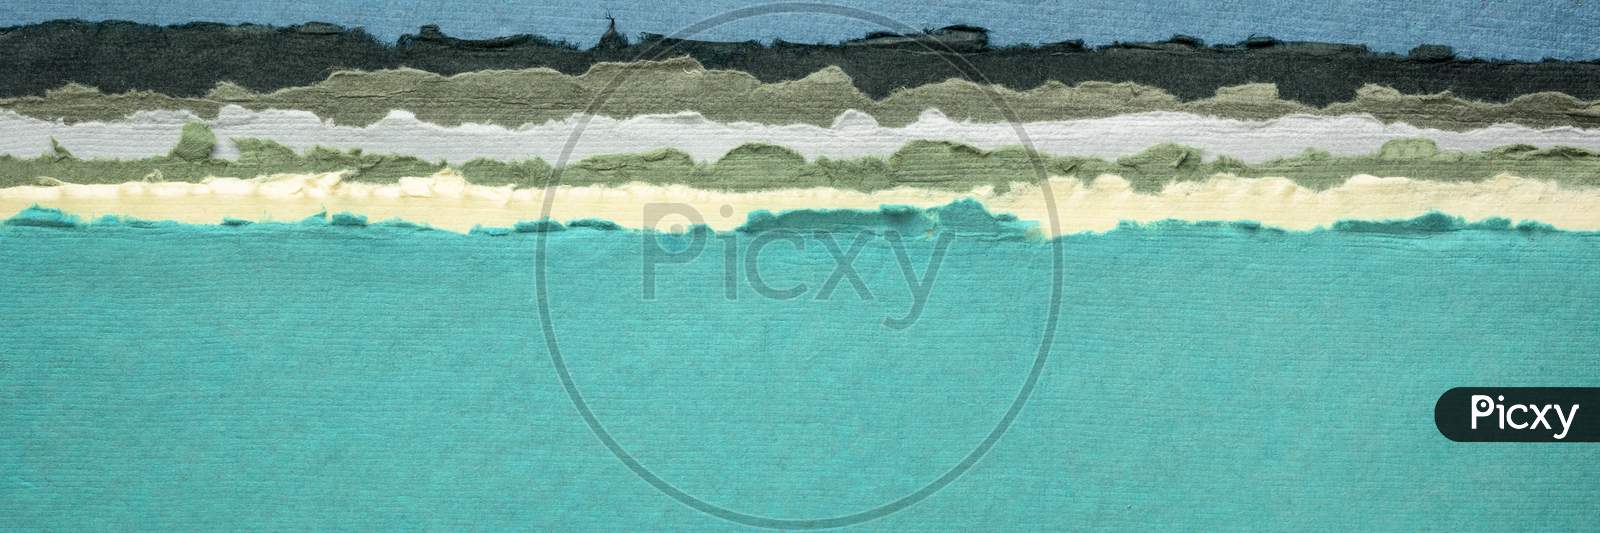 Sky And Sea Panorama - Abstract Landscape In Blue And Green Tones - A Collection Of Colorful Handmade Indian Papers Produced From Recycled Cotton Fabric